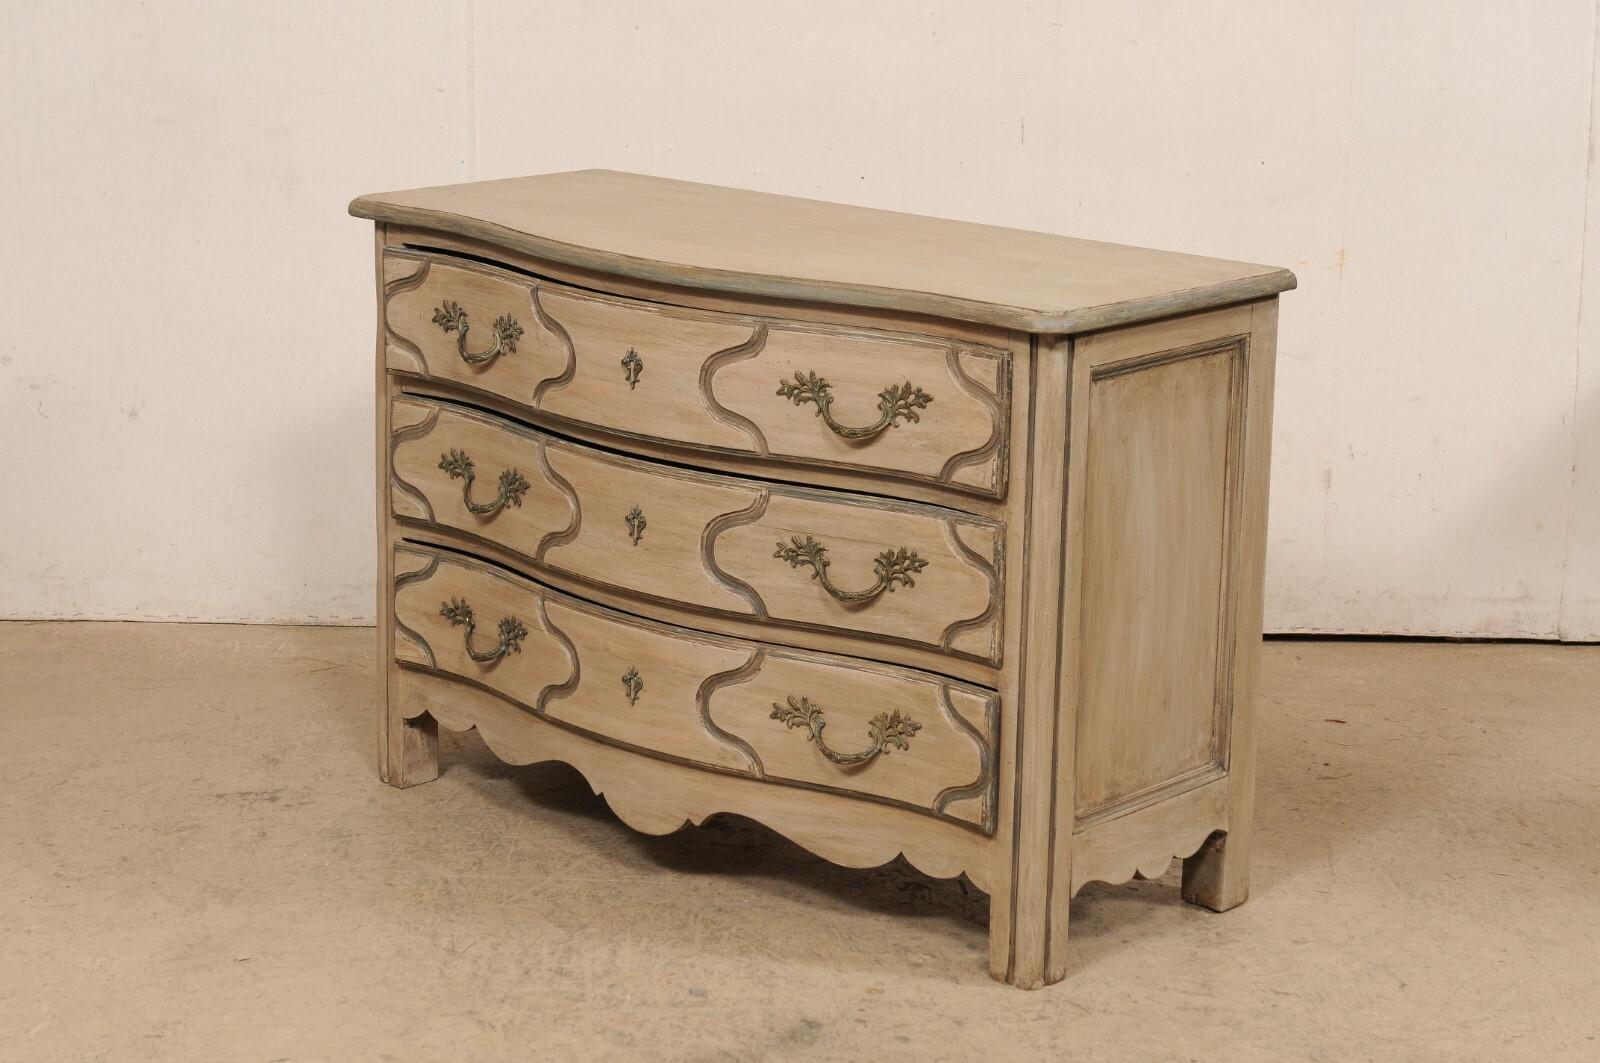 Italian Serpentine Three-Drawer Wooden Chest w/Scalloped Skirt, Mid 20th C. For Sale 4